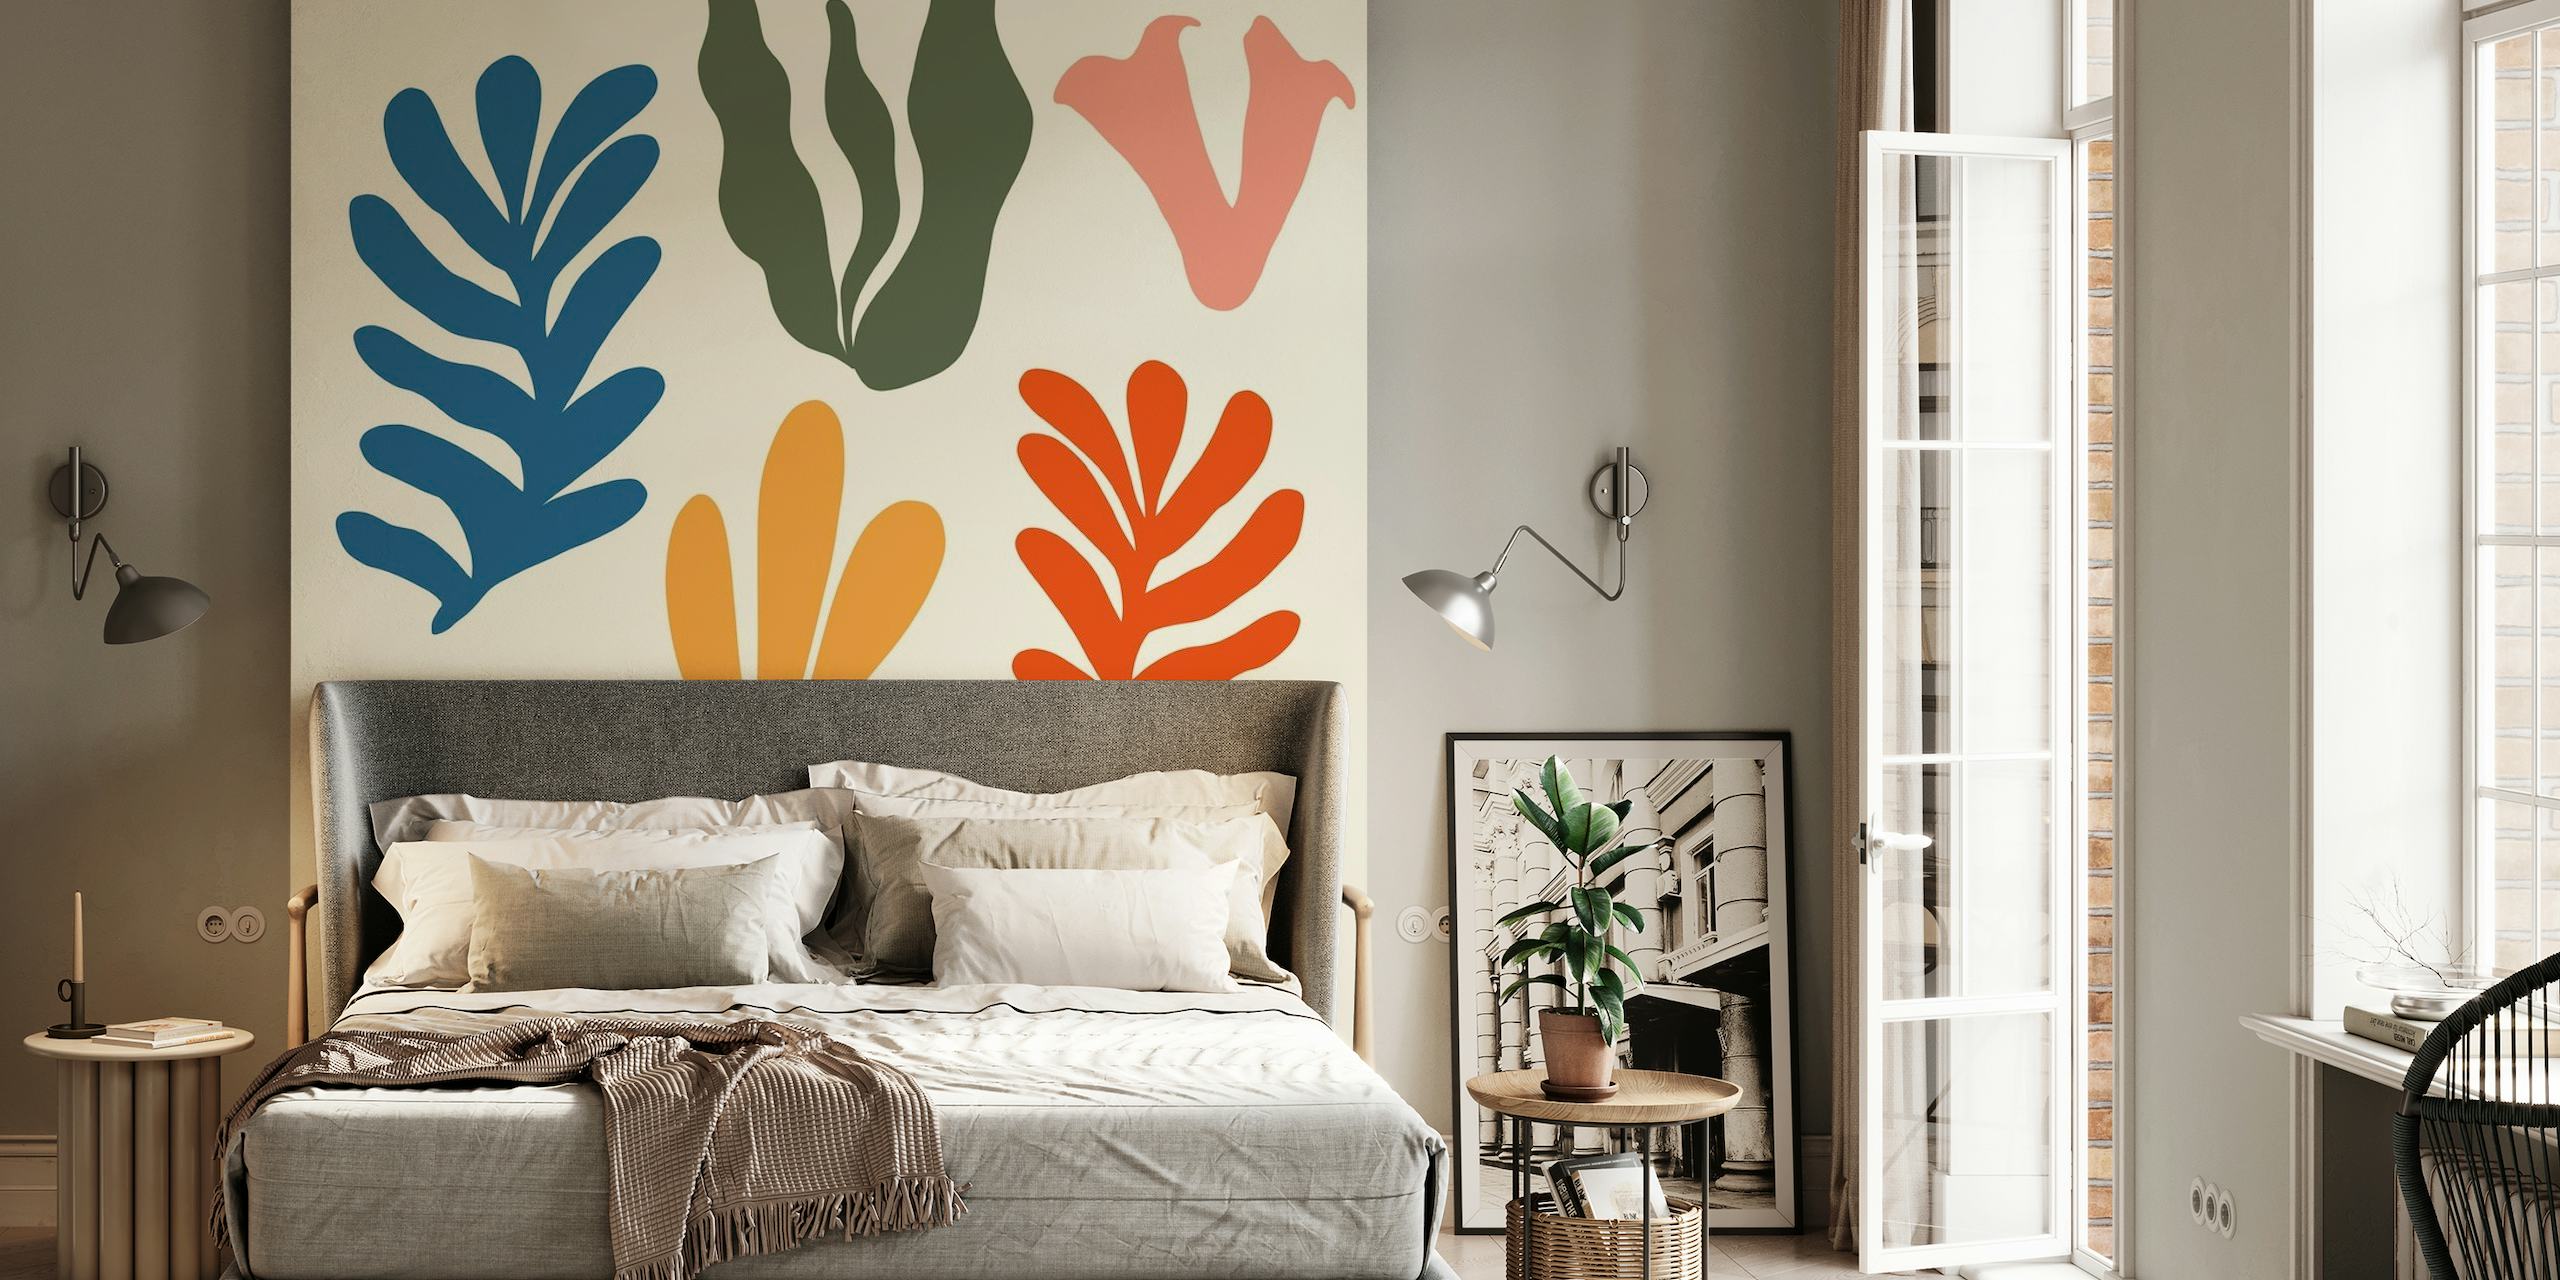 Stylized abstract seagrass wall mural with a variety of colorful shapes on a neutral background